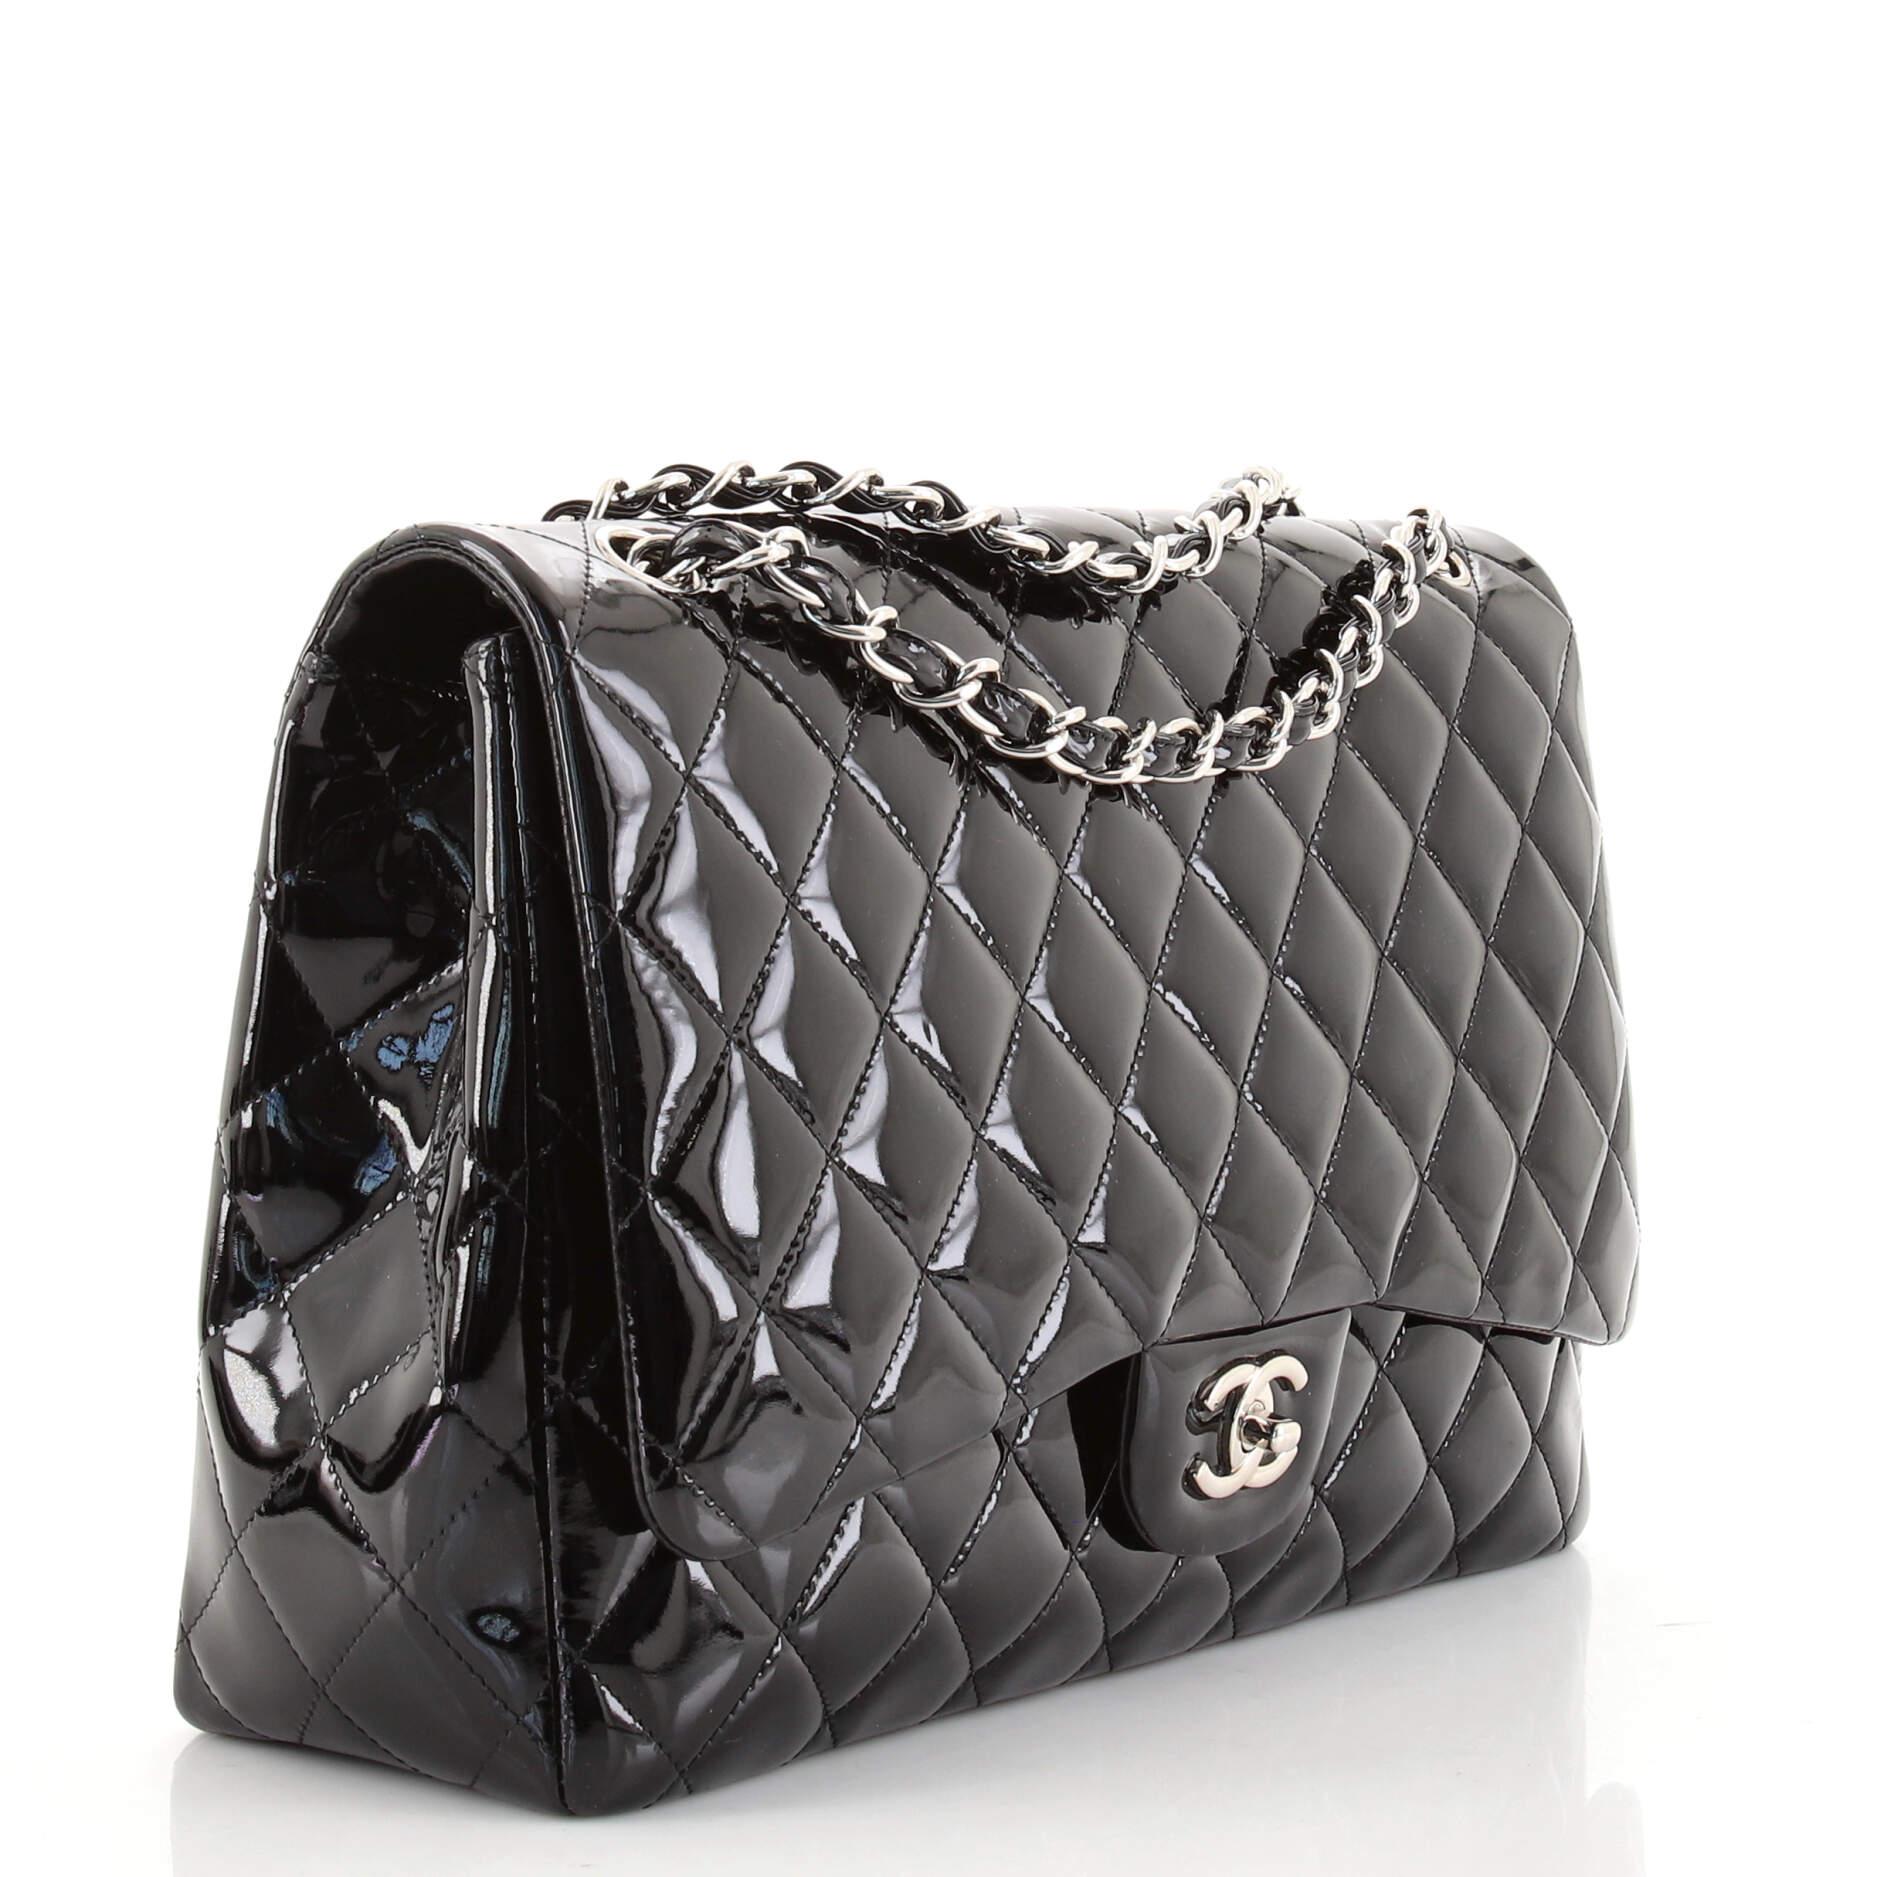 Black Chanel Classic Single Flap Bag Quilted Patent Maxi